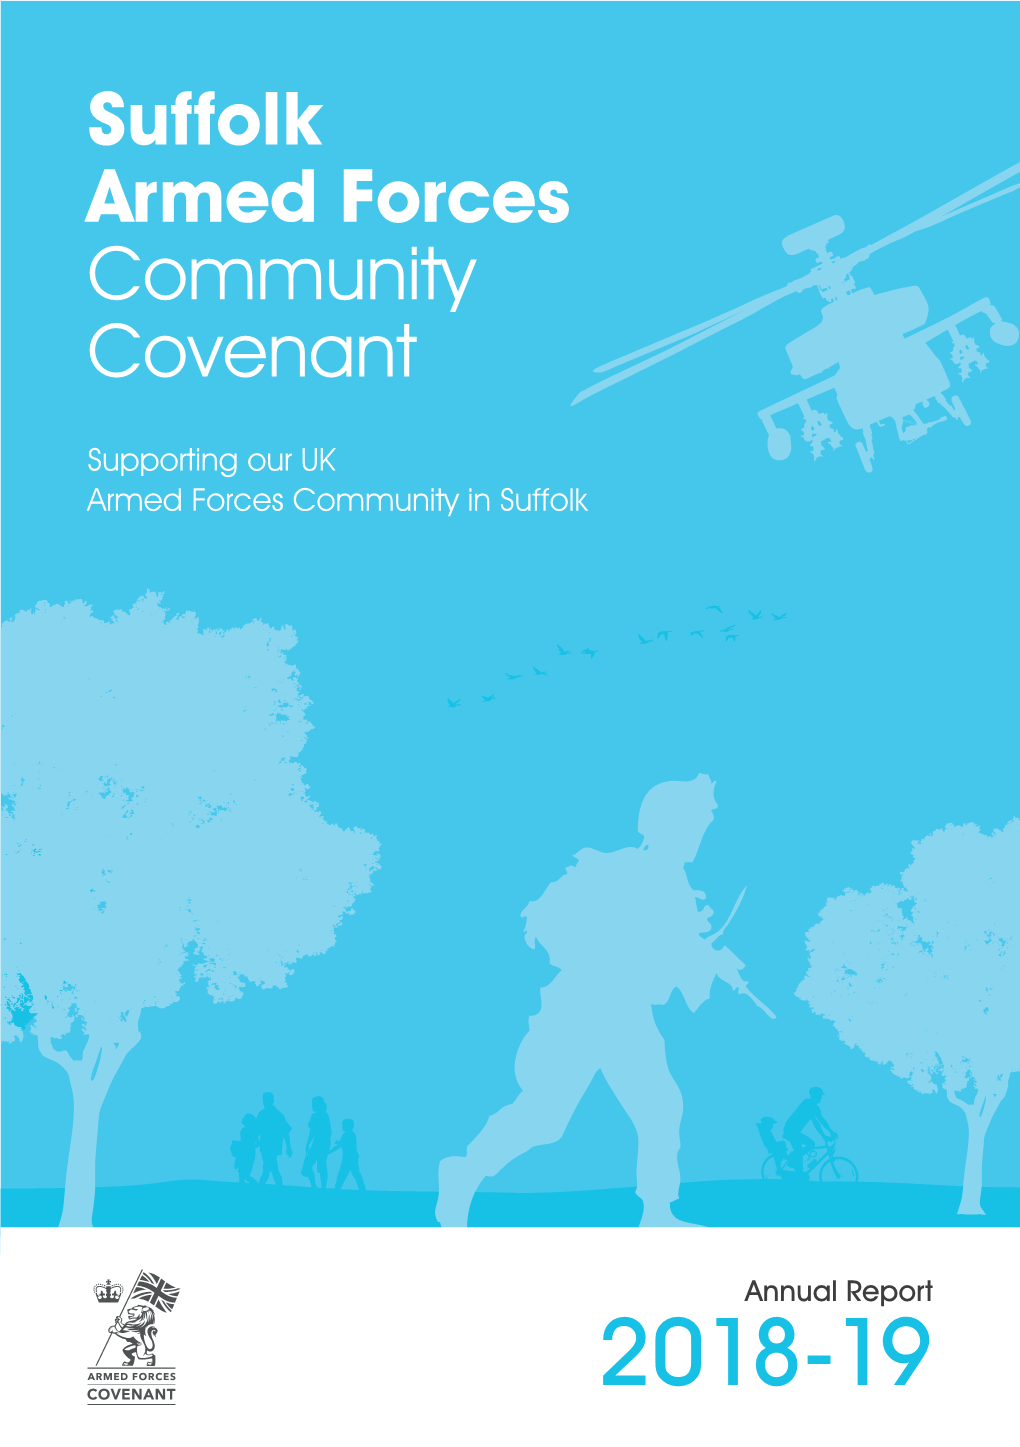 Suffolk Armed Forces Community Covenant